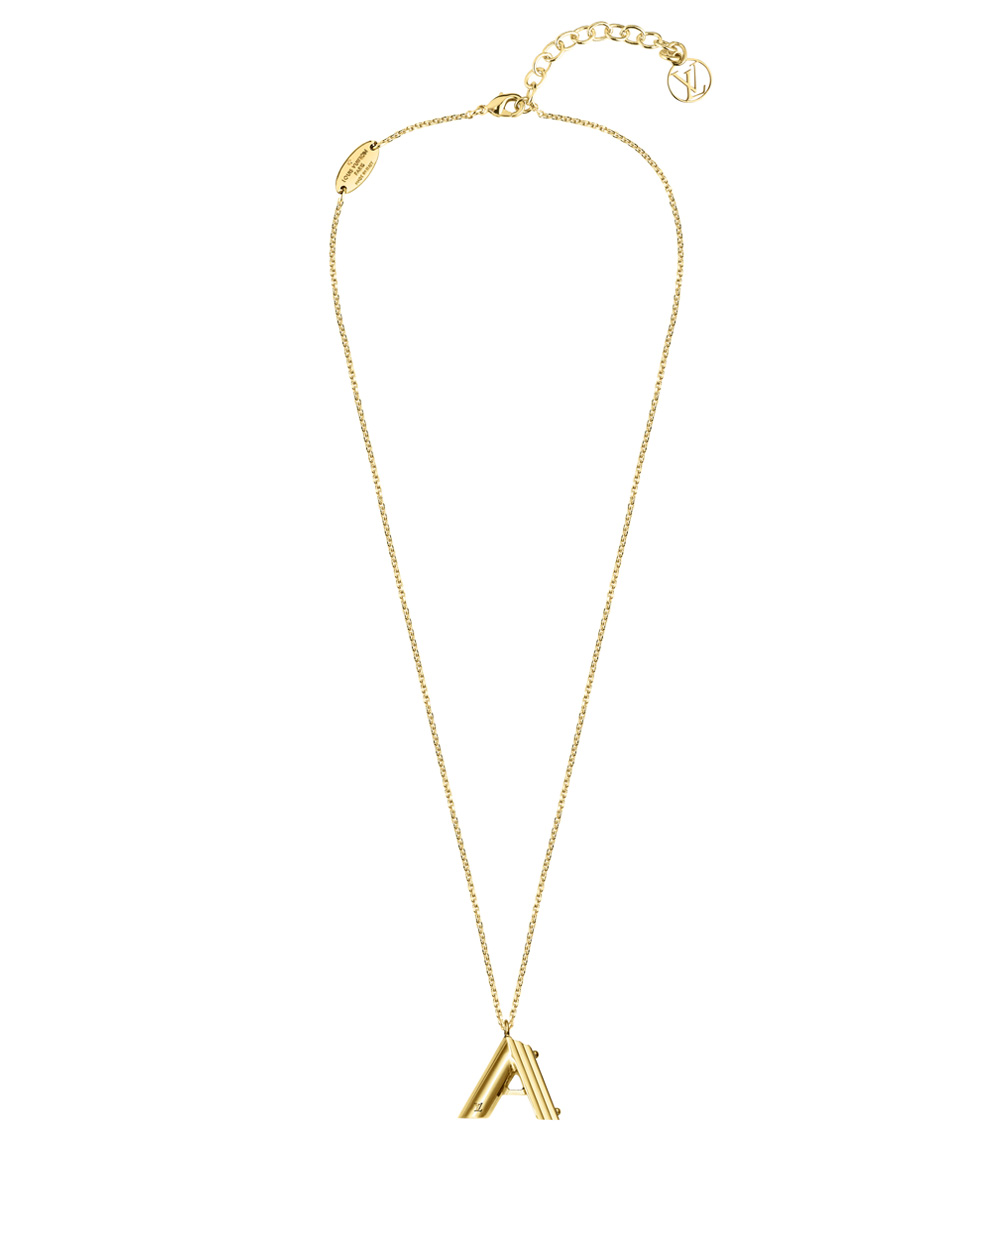 Necklace, $705, by Louis Vuitton.